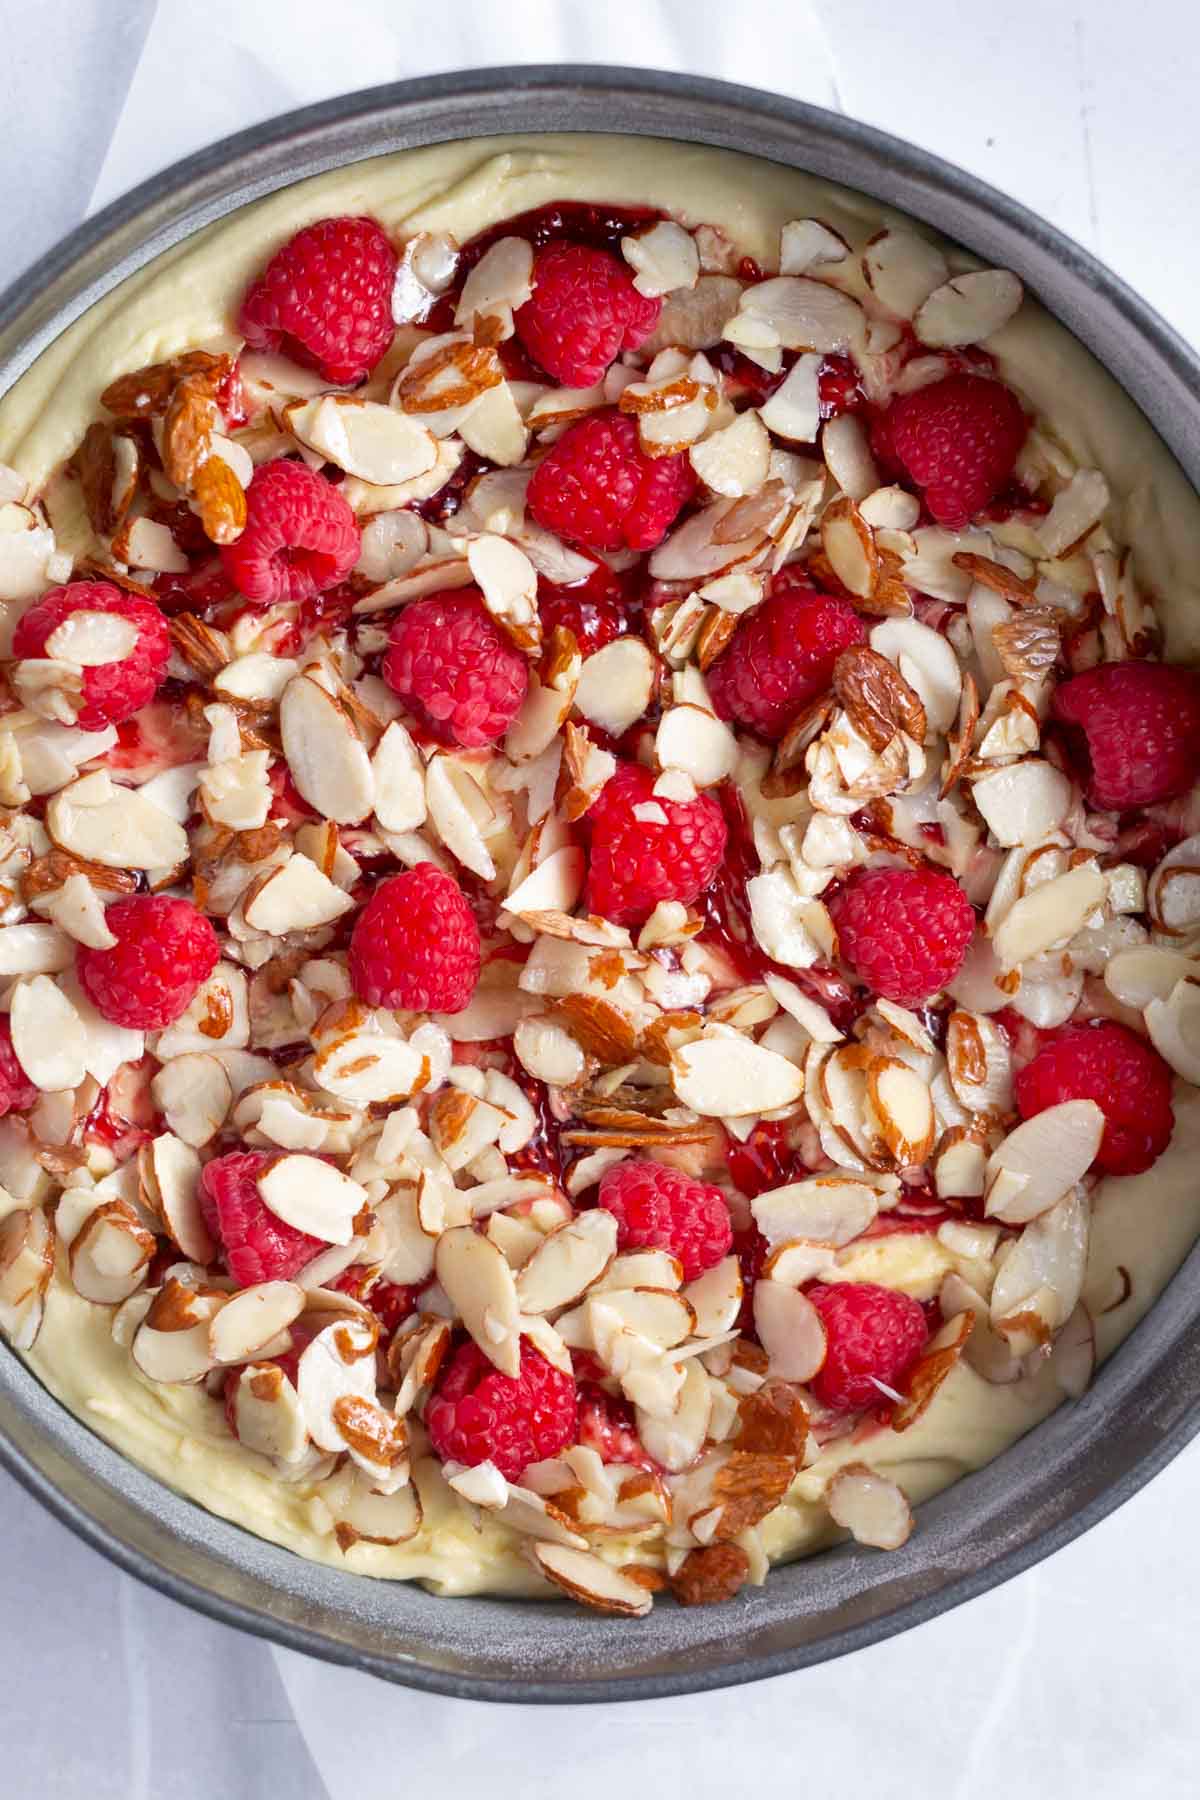 almond slices and fresh raspberries over the cake batter in a springform pan